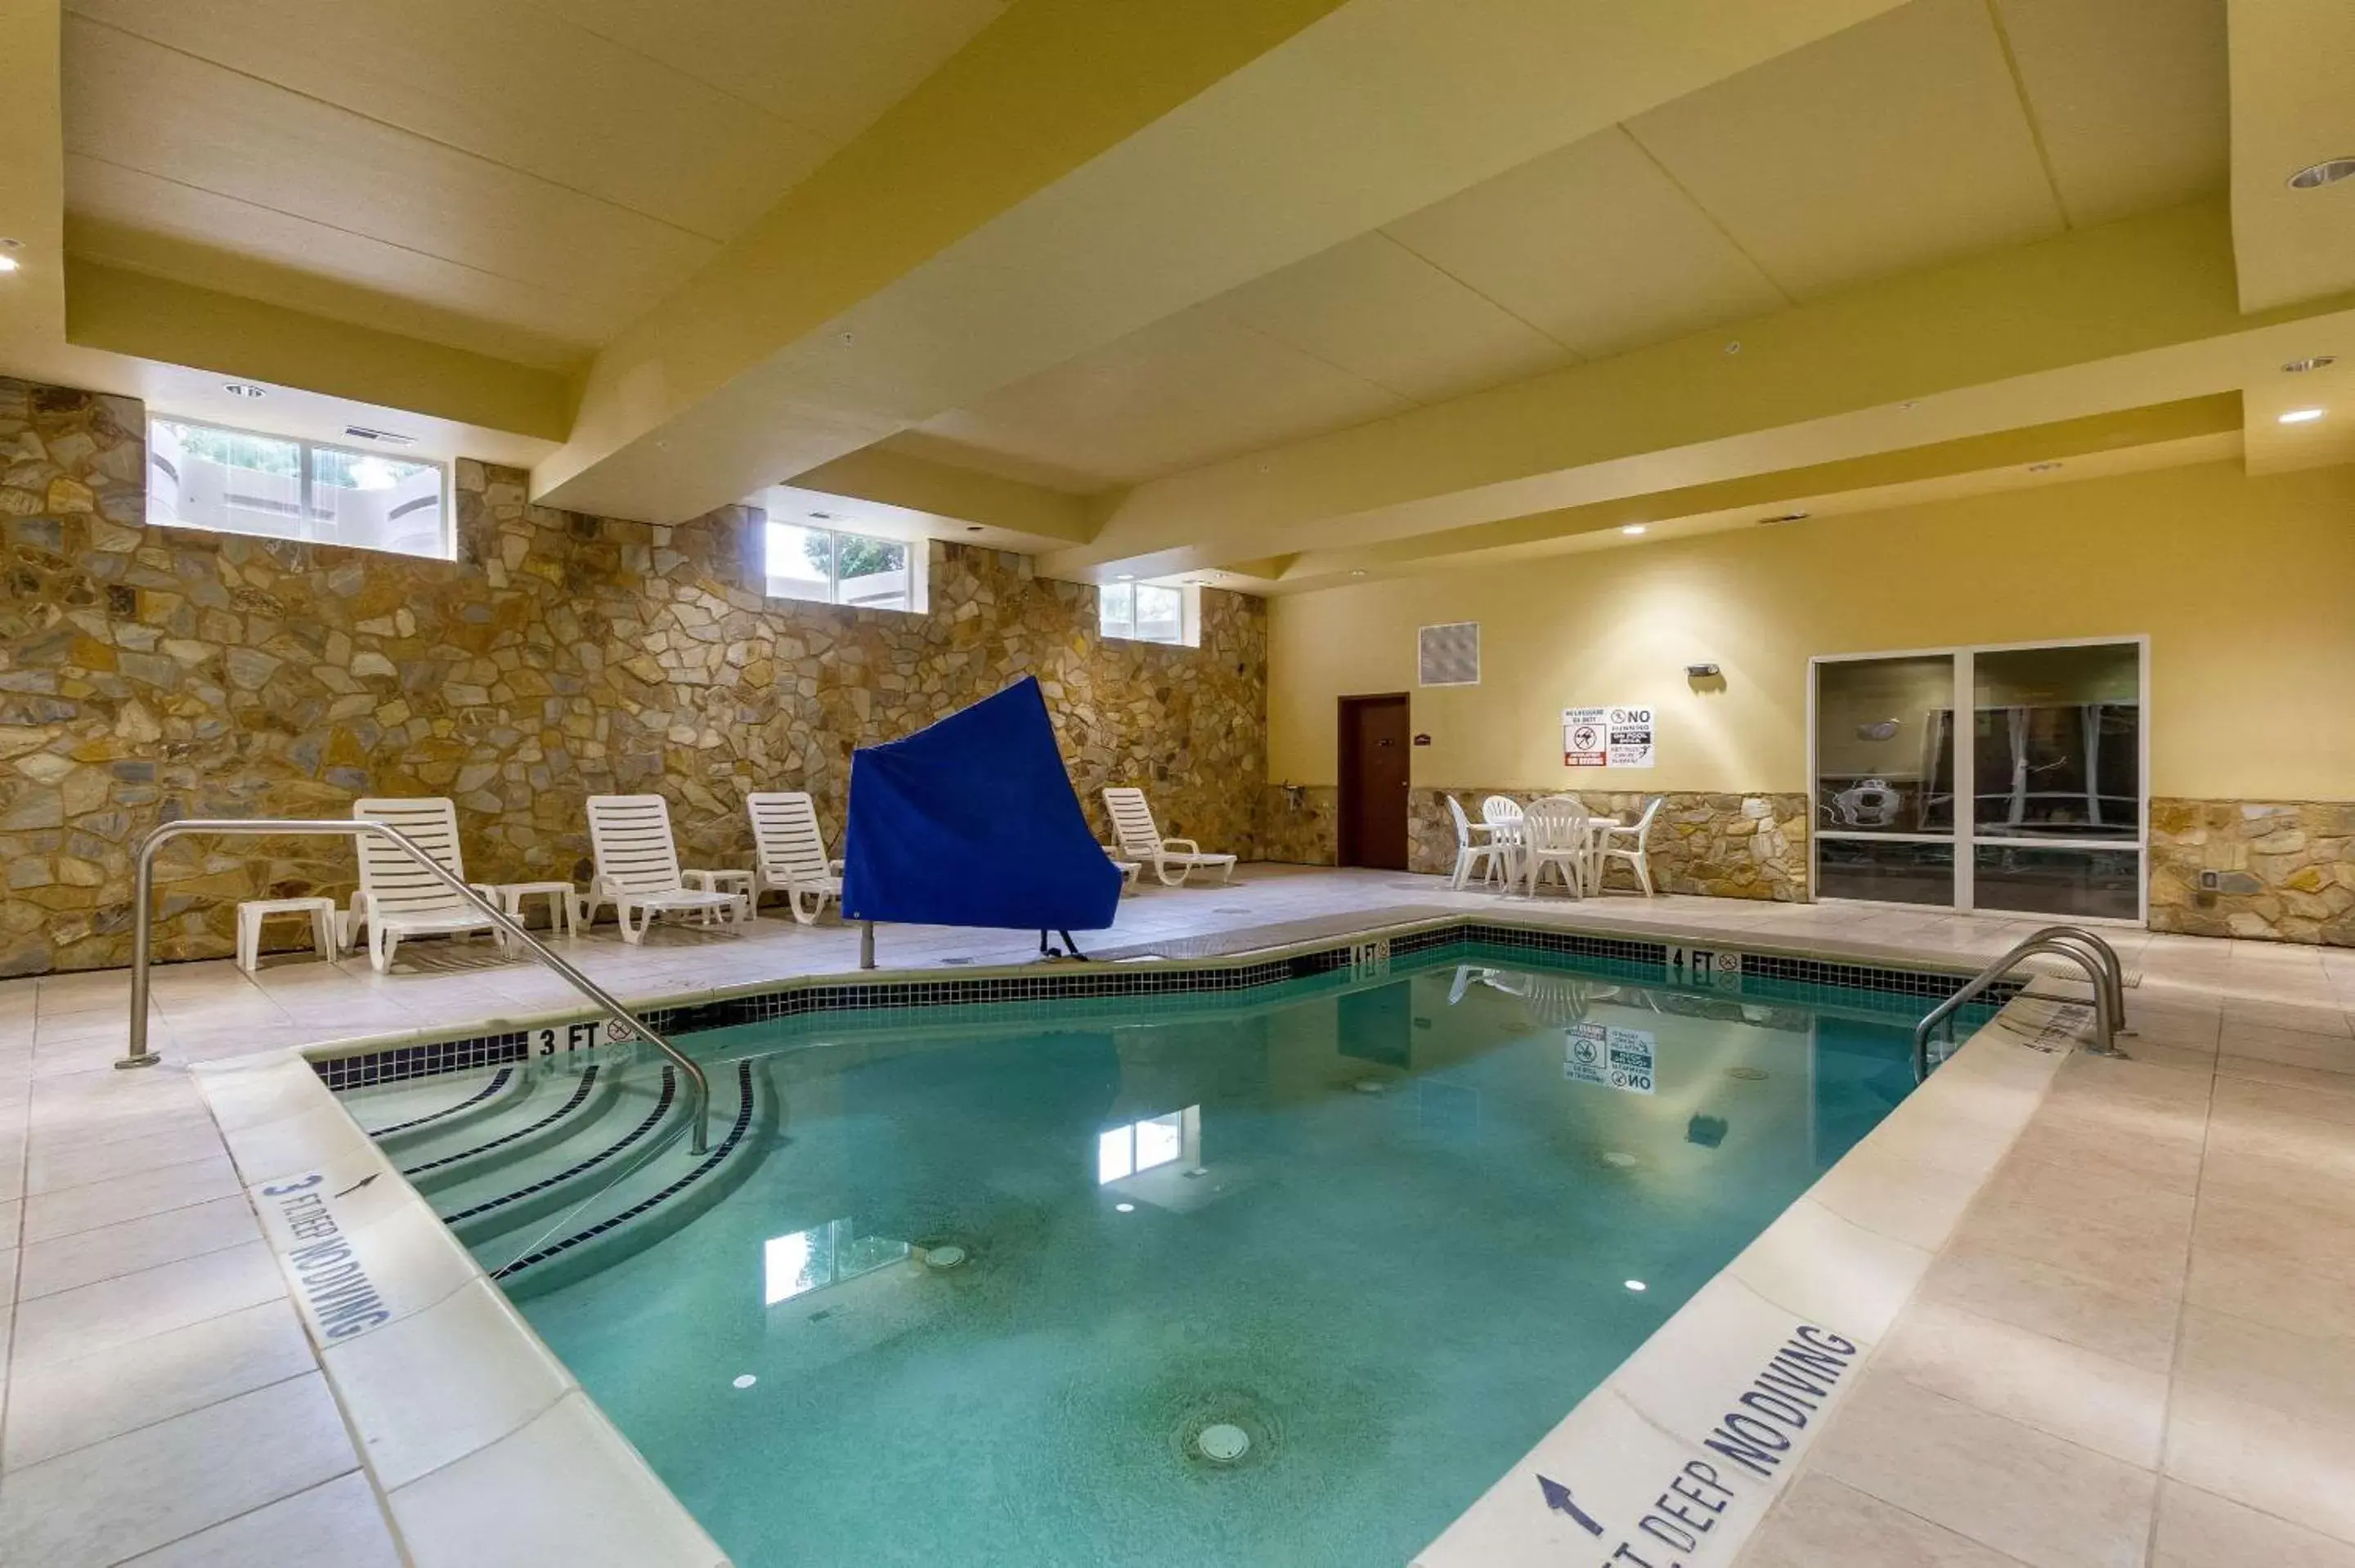 On site, Swimming Pool in Comfort Suites Near Gettysburg Battlefield Visitor Center